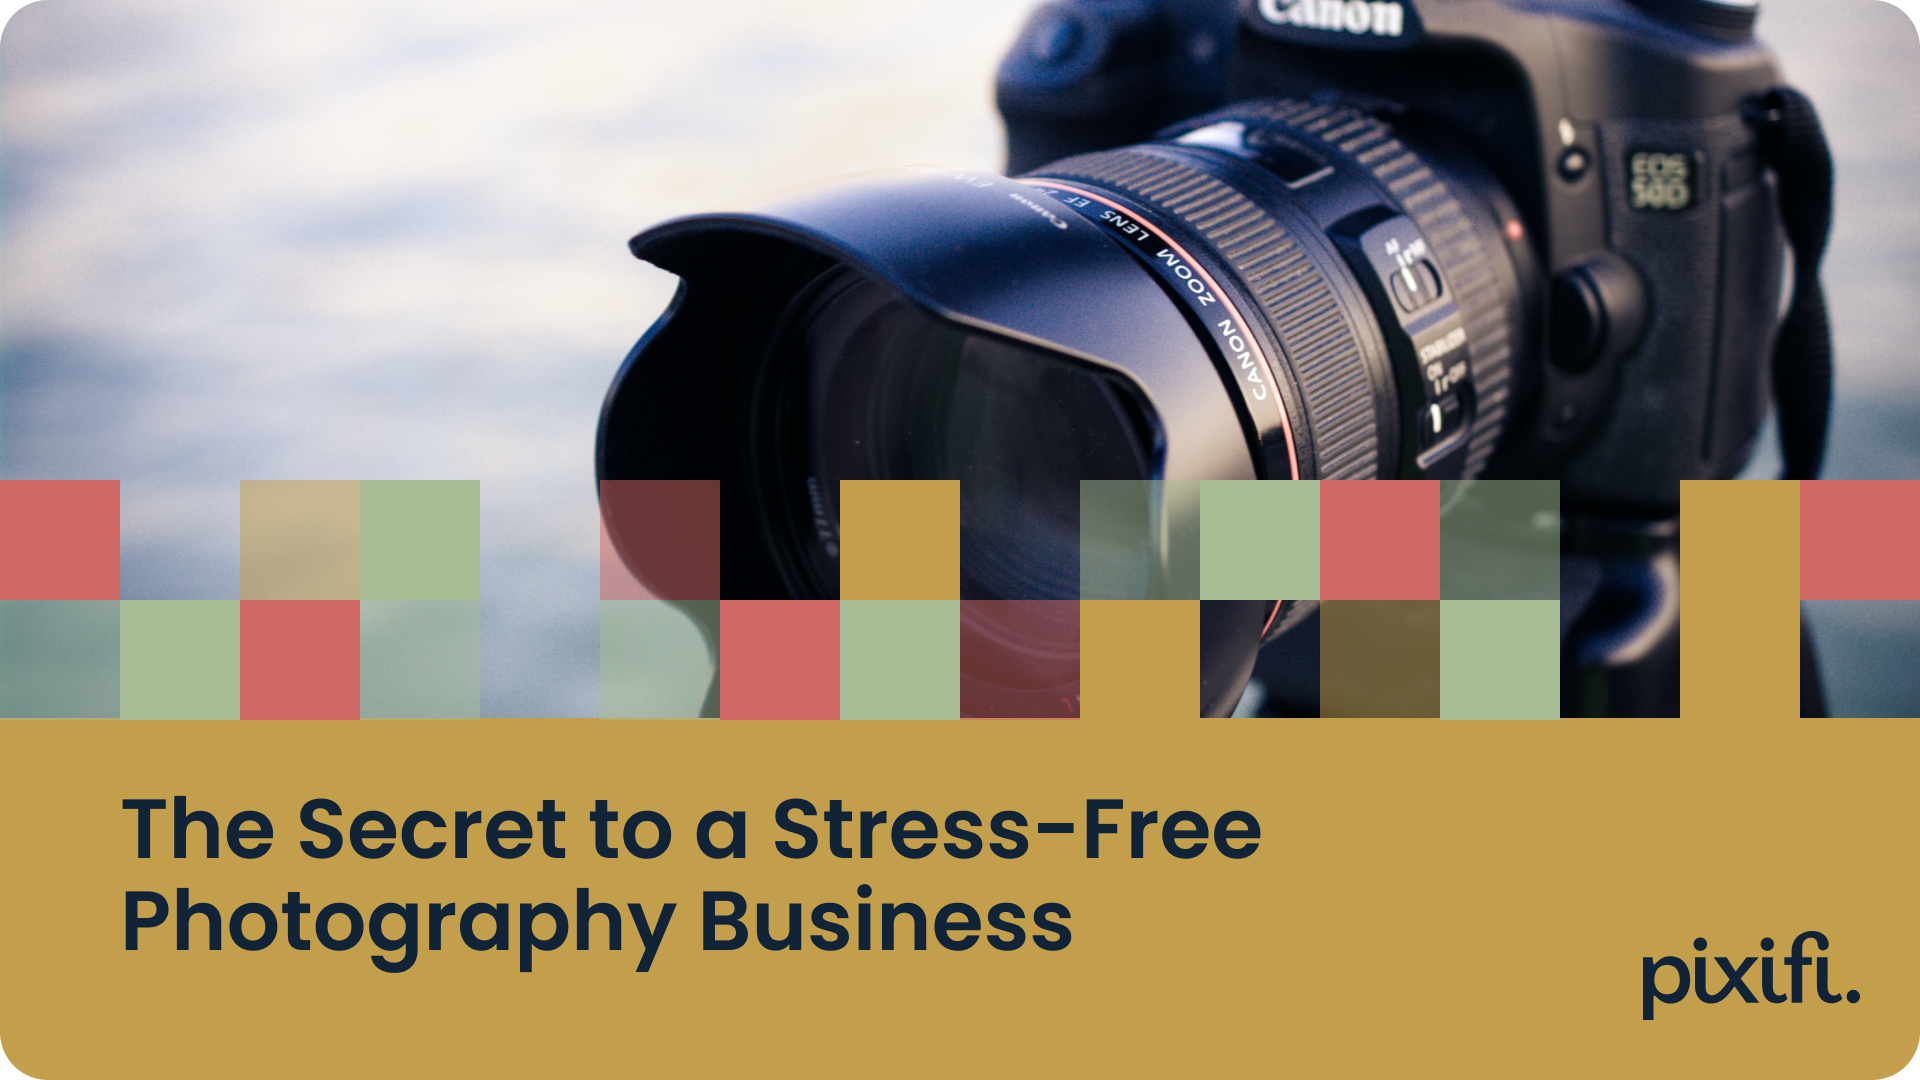 The Secret to a Stress-Free Photography Business